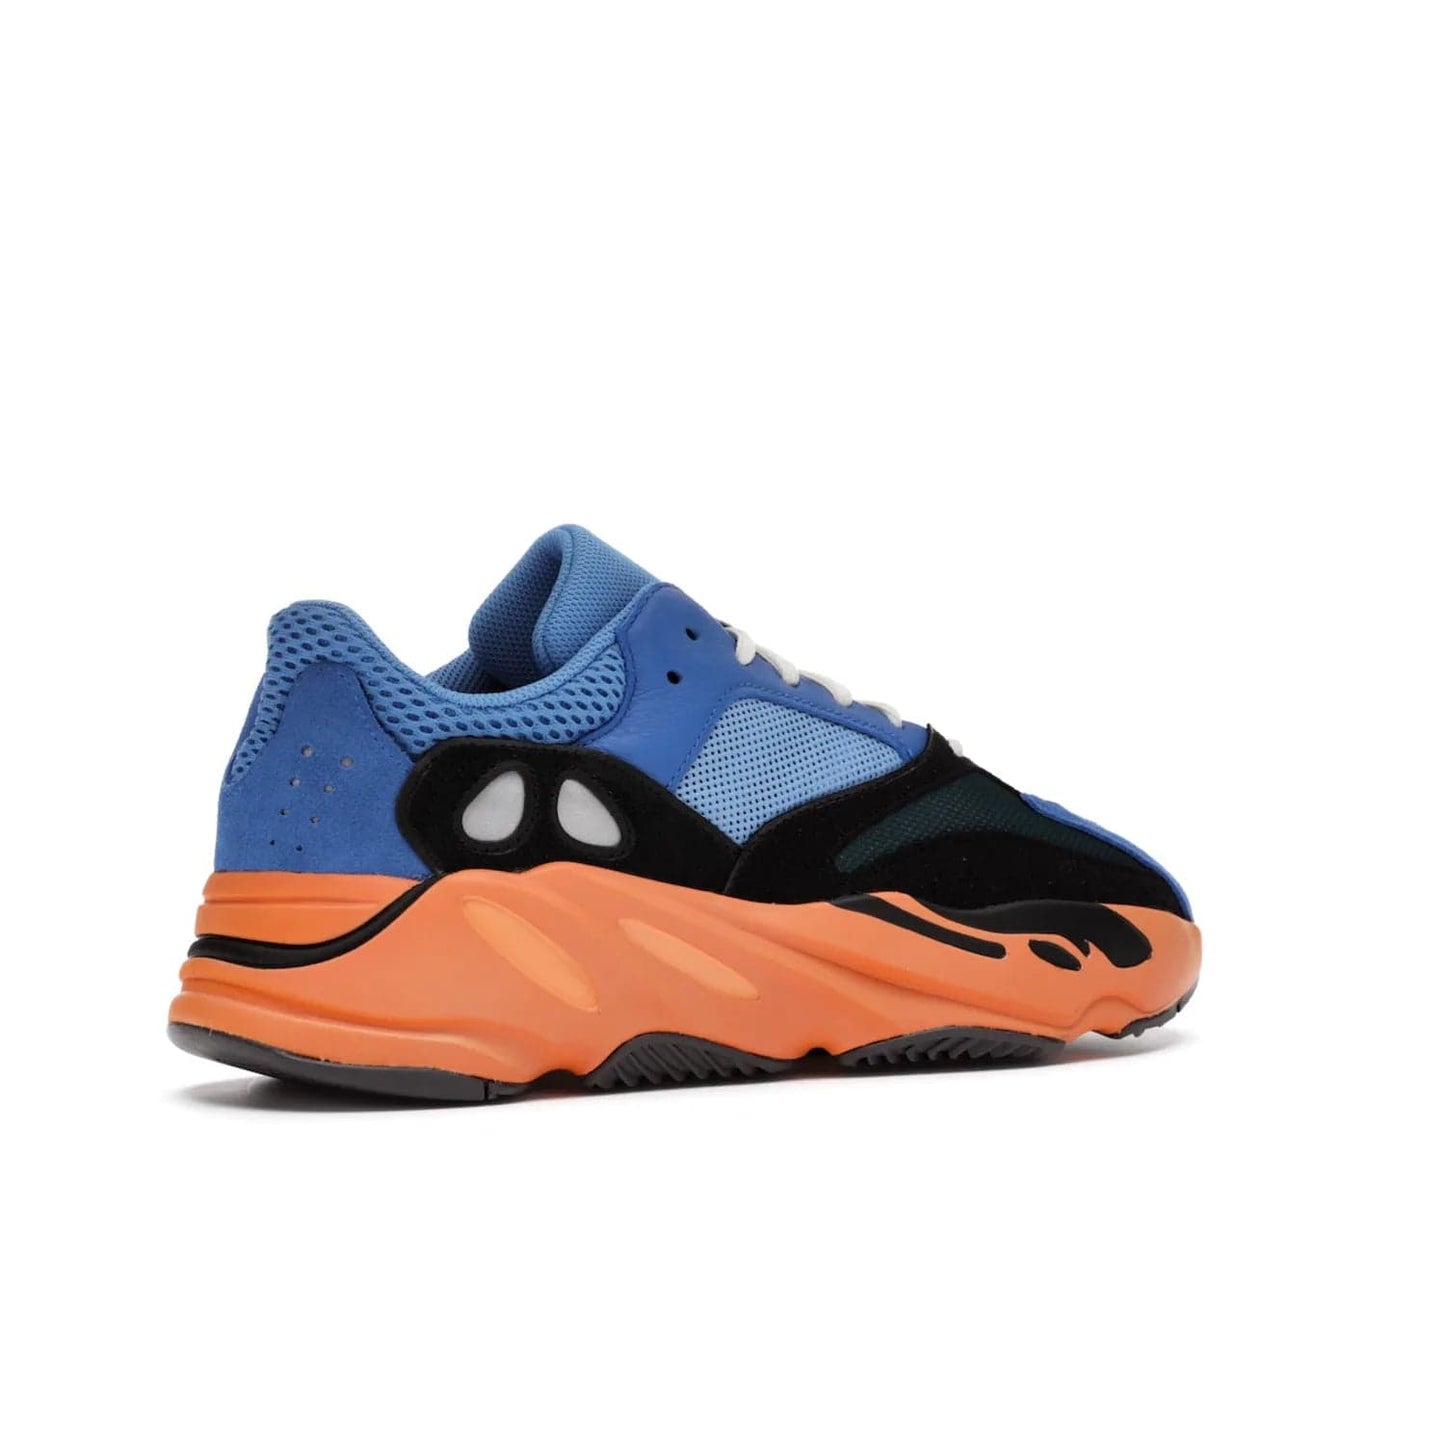 adidas Yeezy Boost 700 Bright Blue - Image 34 - Only at www.BallersClubKickz.com - Iconic sneaker style meets vibrant colour with the adidas Yeezy Boost 700 Bright Blue. Reflective accents, turquoise and teal panels, bright orange midsole and black outsole make for a bold release. April 2021.